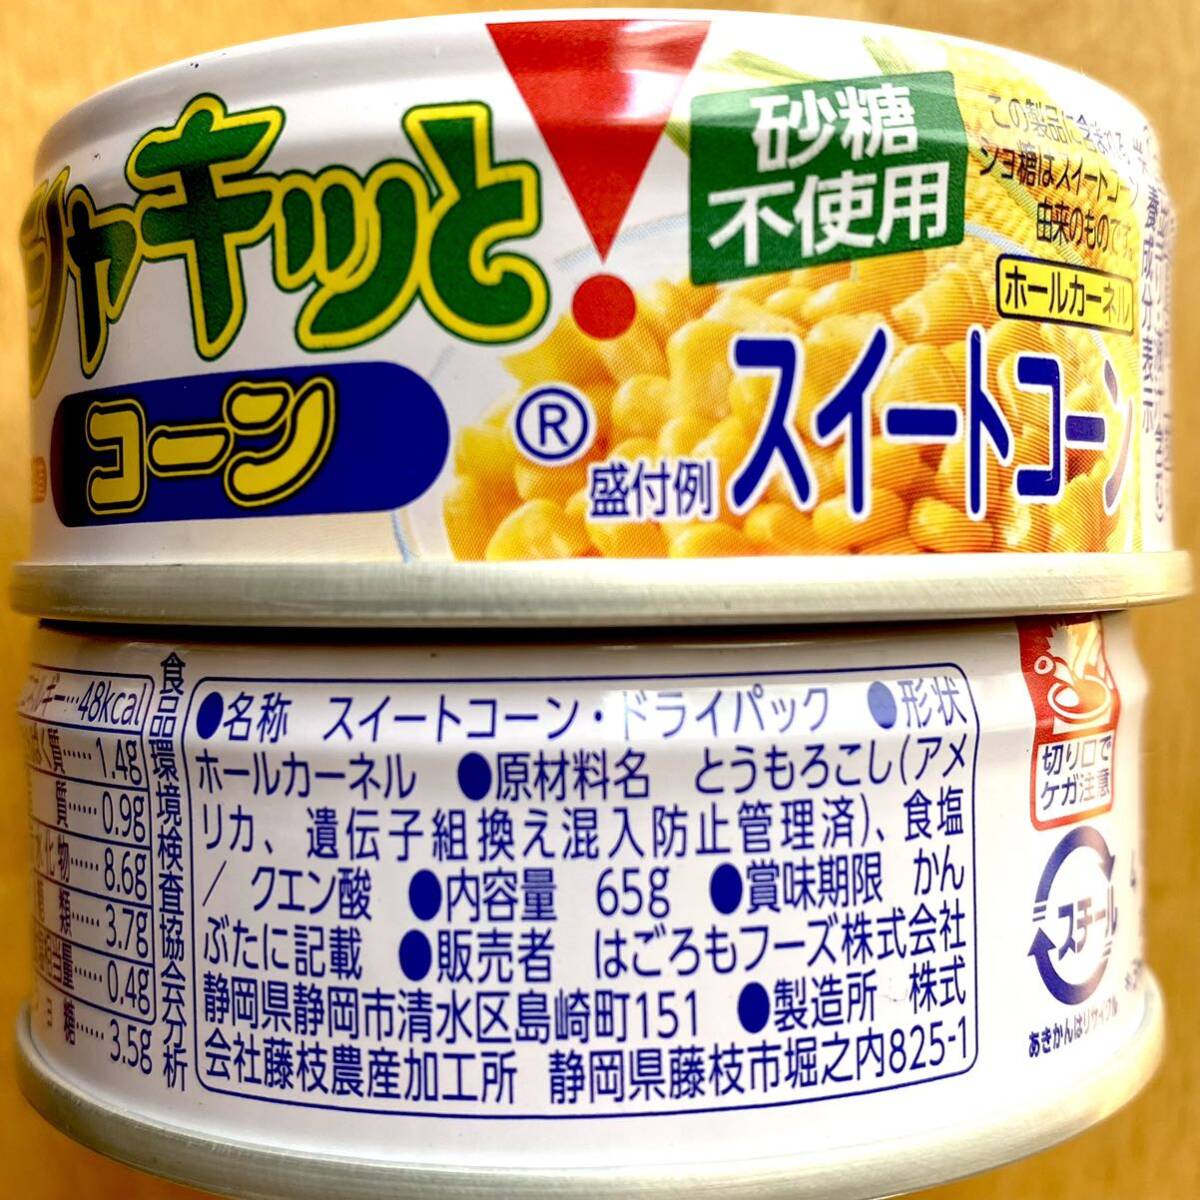 Hagoromo is around .f-z[si-chi gold mild water ., domestic manufacture goods ][ car ki. corn, sugar un- use ]12 can set preserved food coupon use 